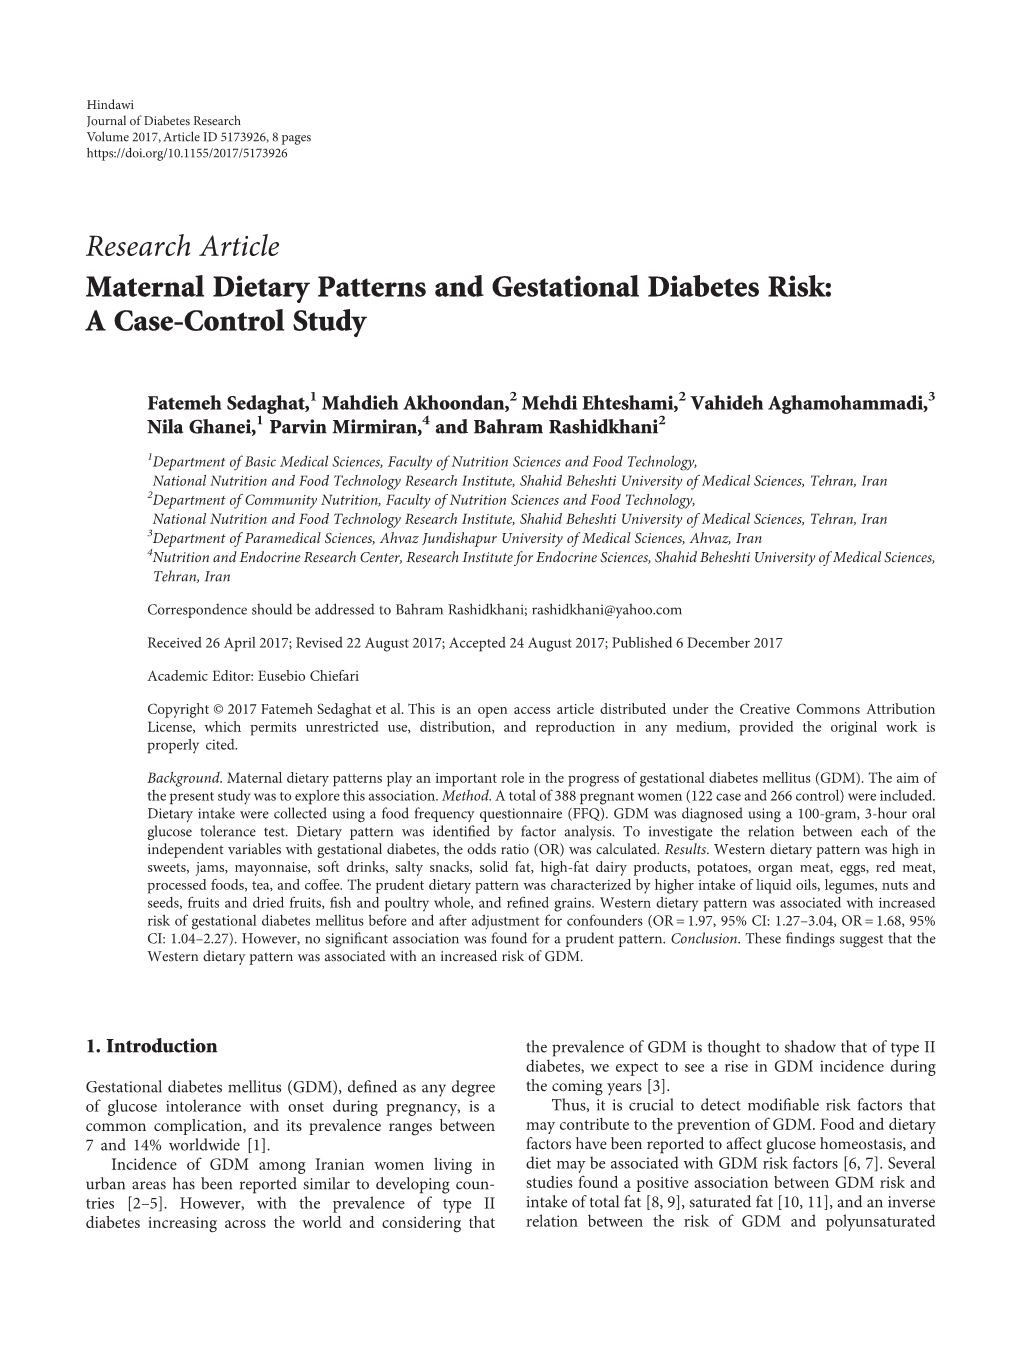 Research Article Maternal Dietary Patterns and Gestational Diabetes Risk: a Case-Control Study